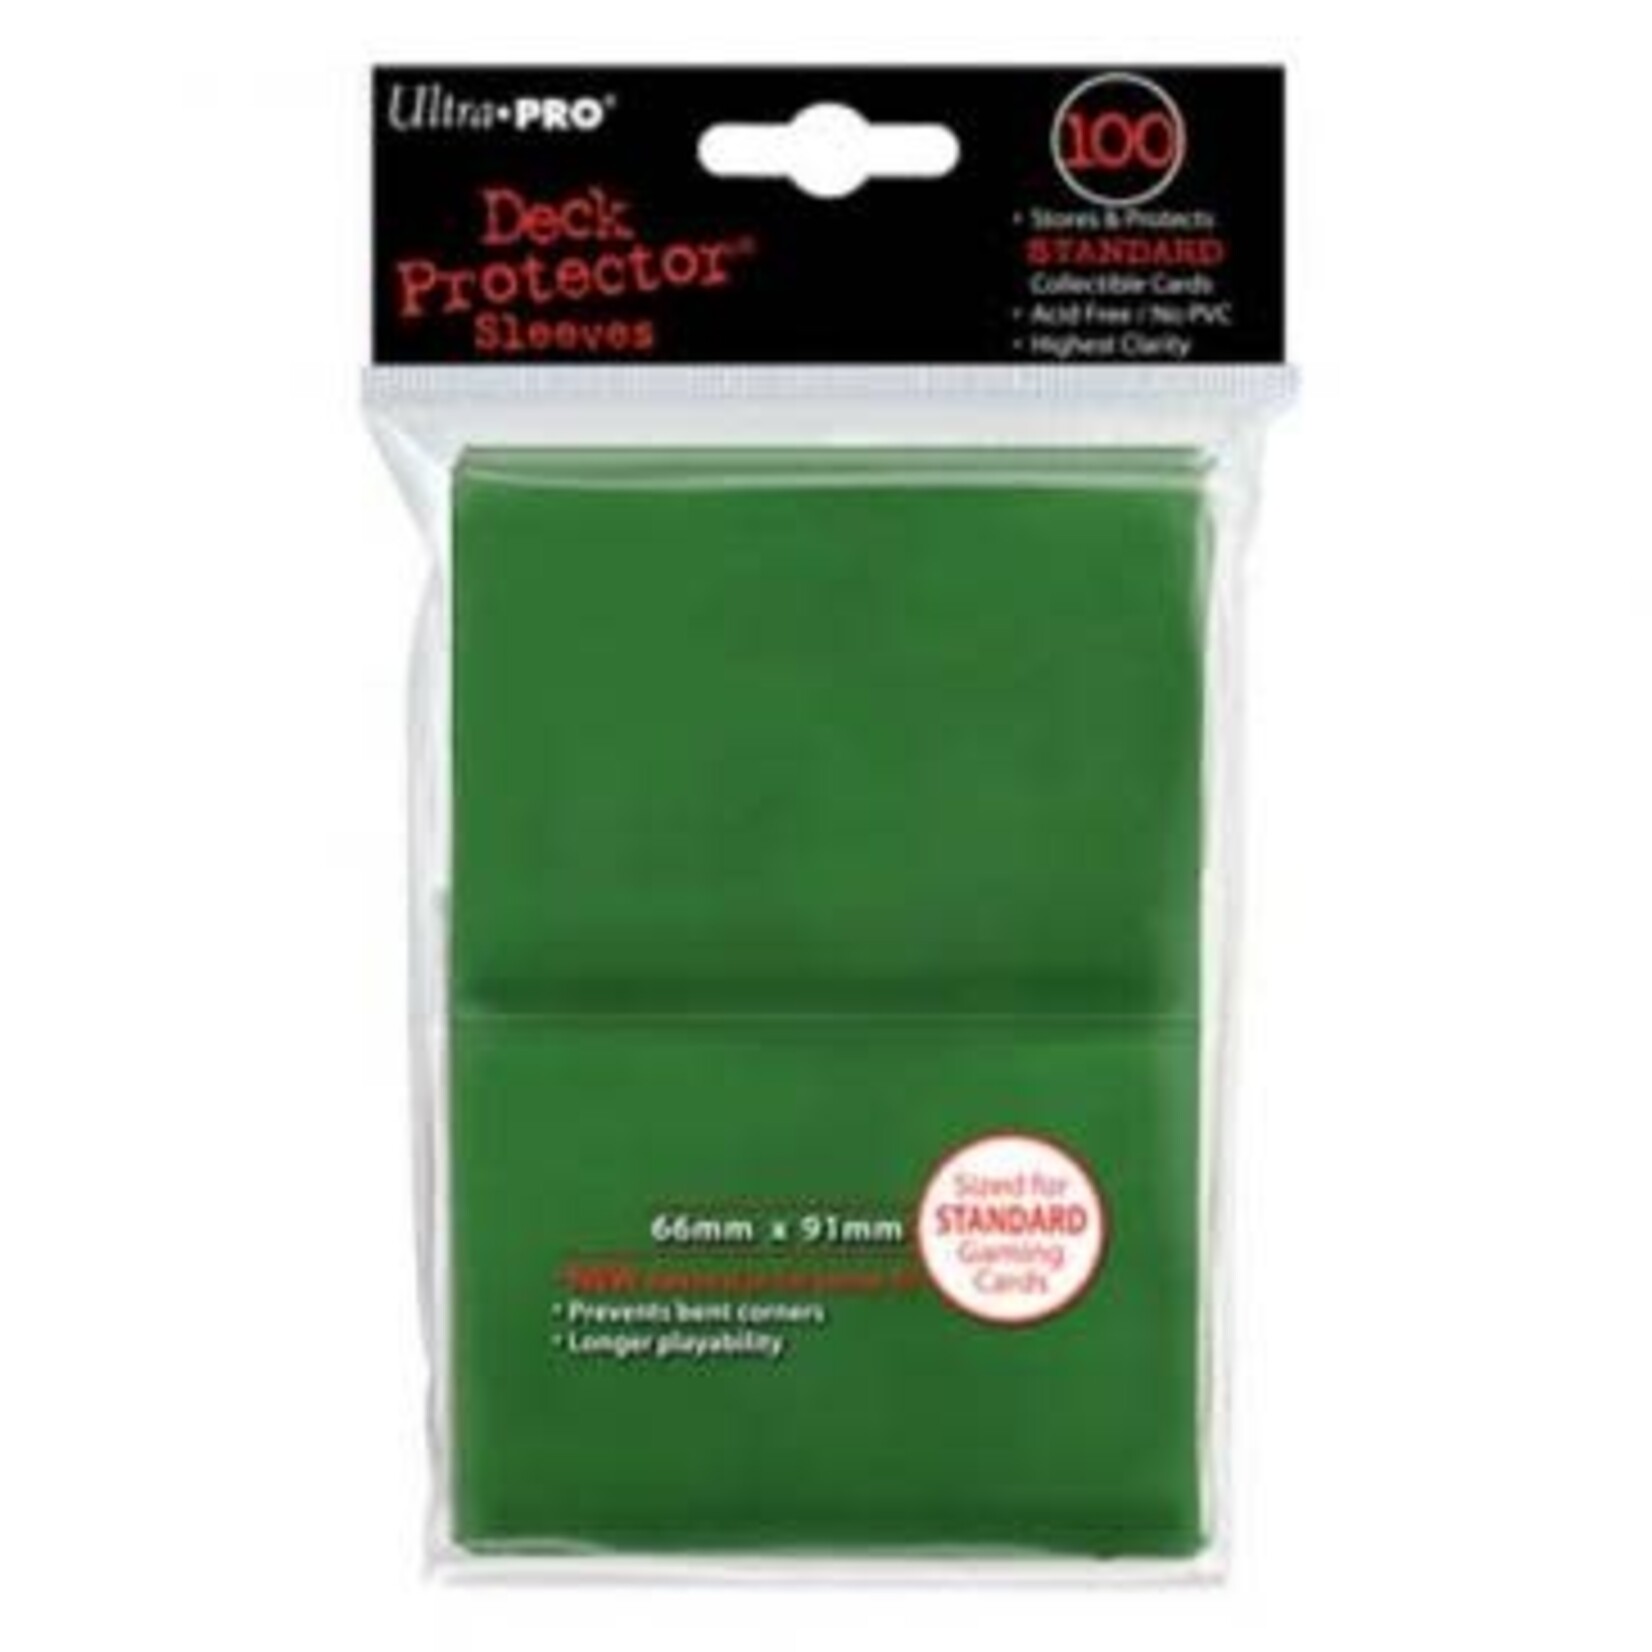 Ultra Pro Deck Protector Sleeves (100): Green Ultra Pro